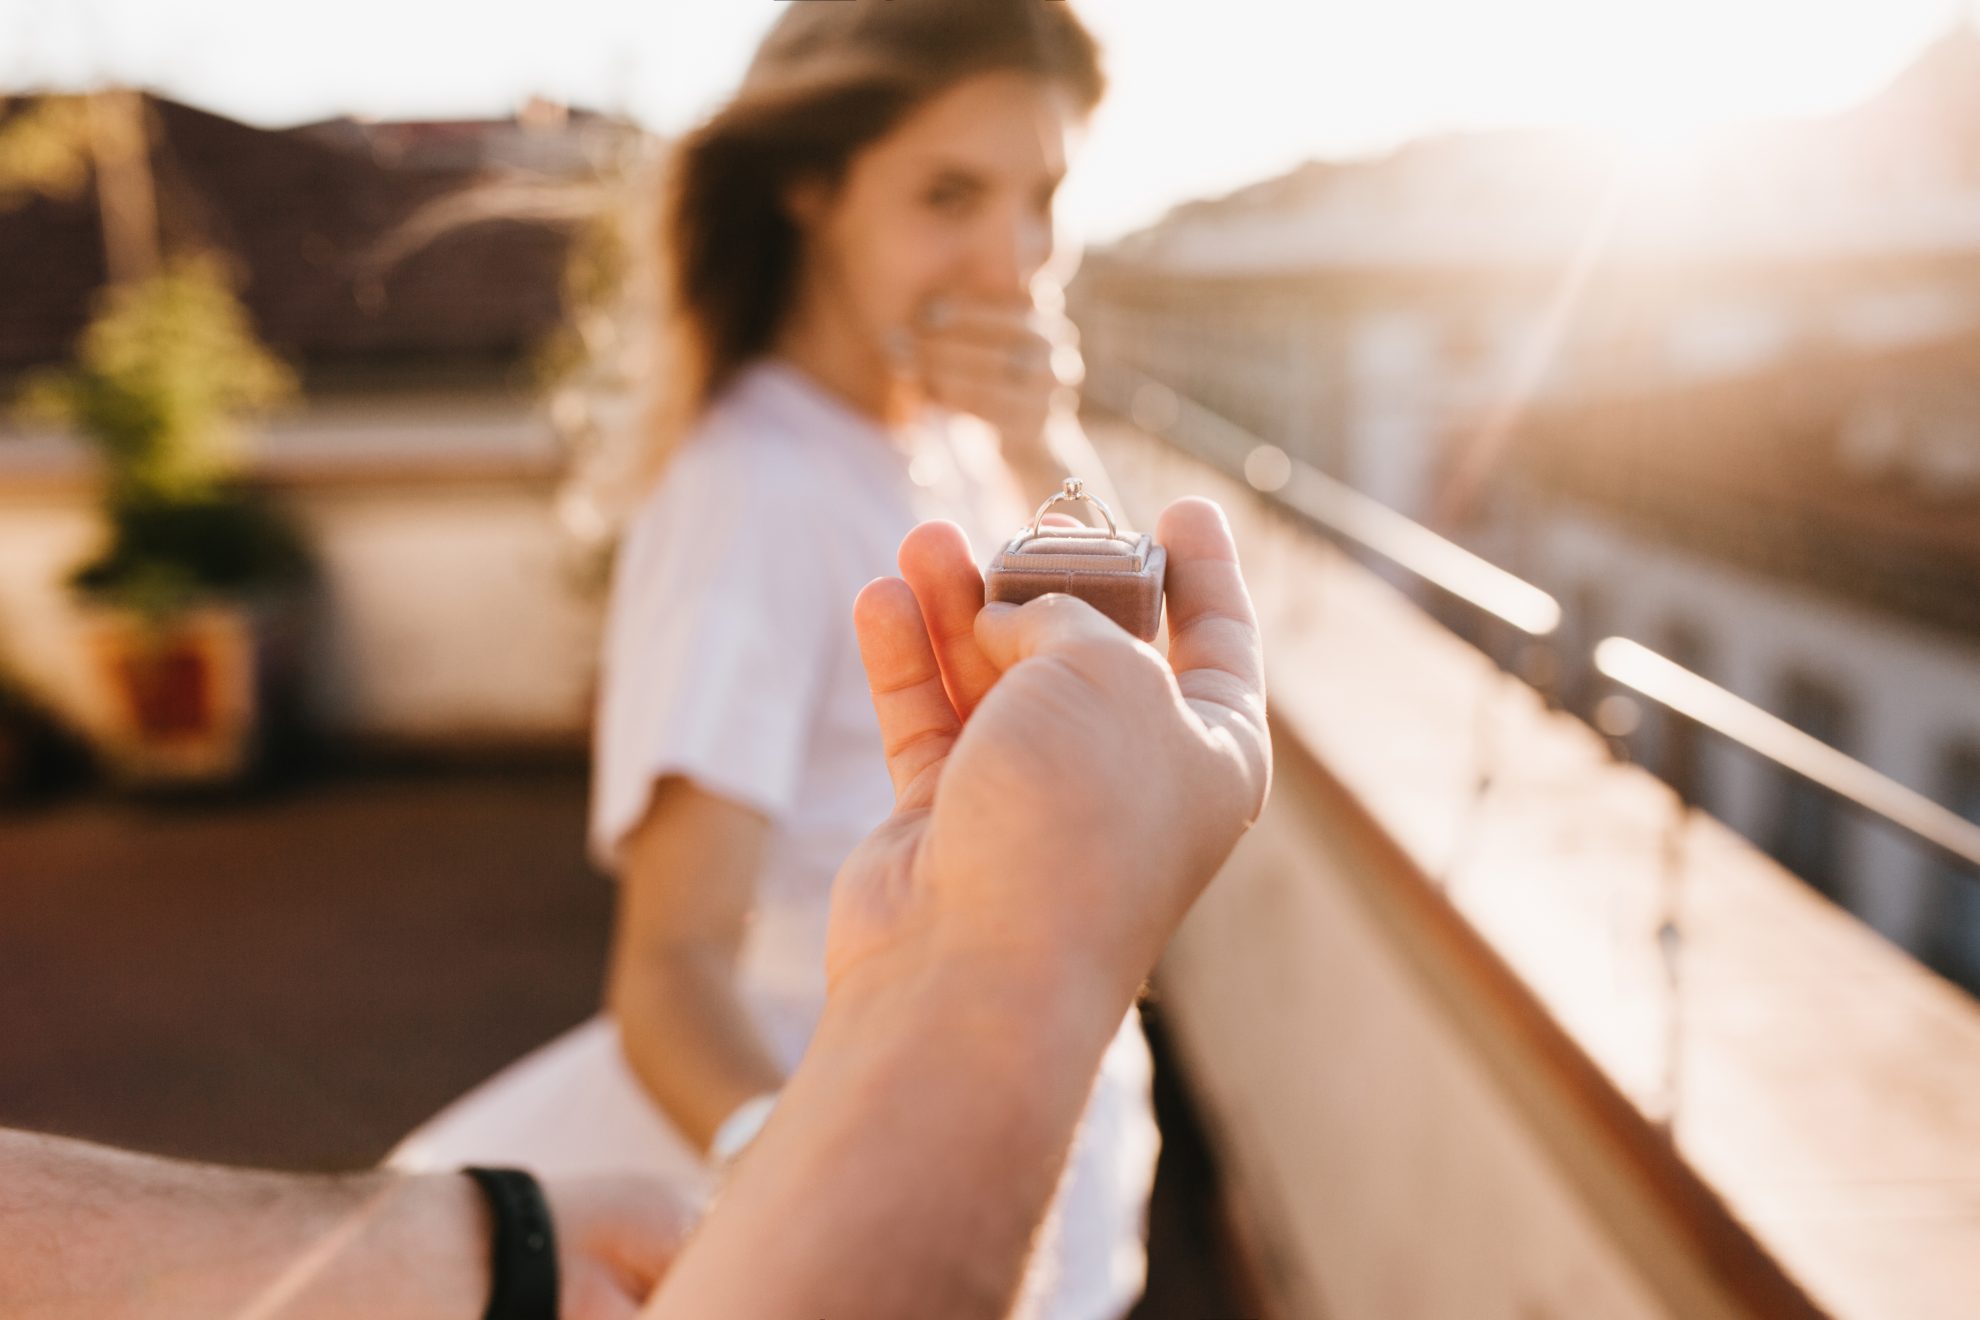 A male hand holds an engagaement ring. We can see a surprised looking woman in the background. Image used in the 8 signs your partner is going to propose article.